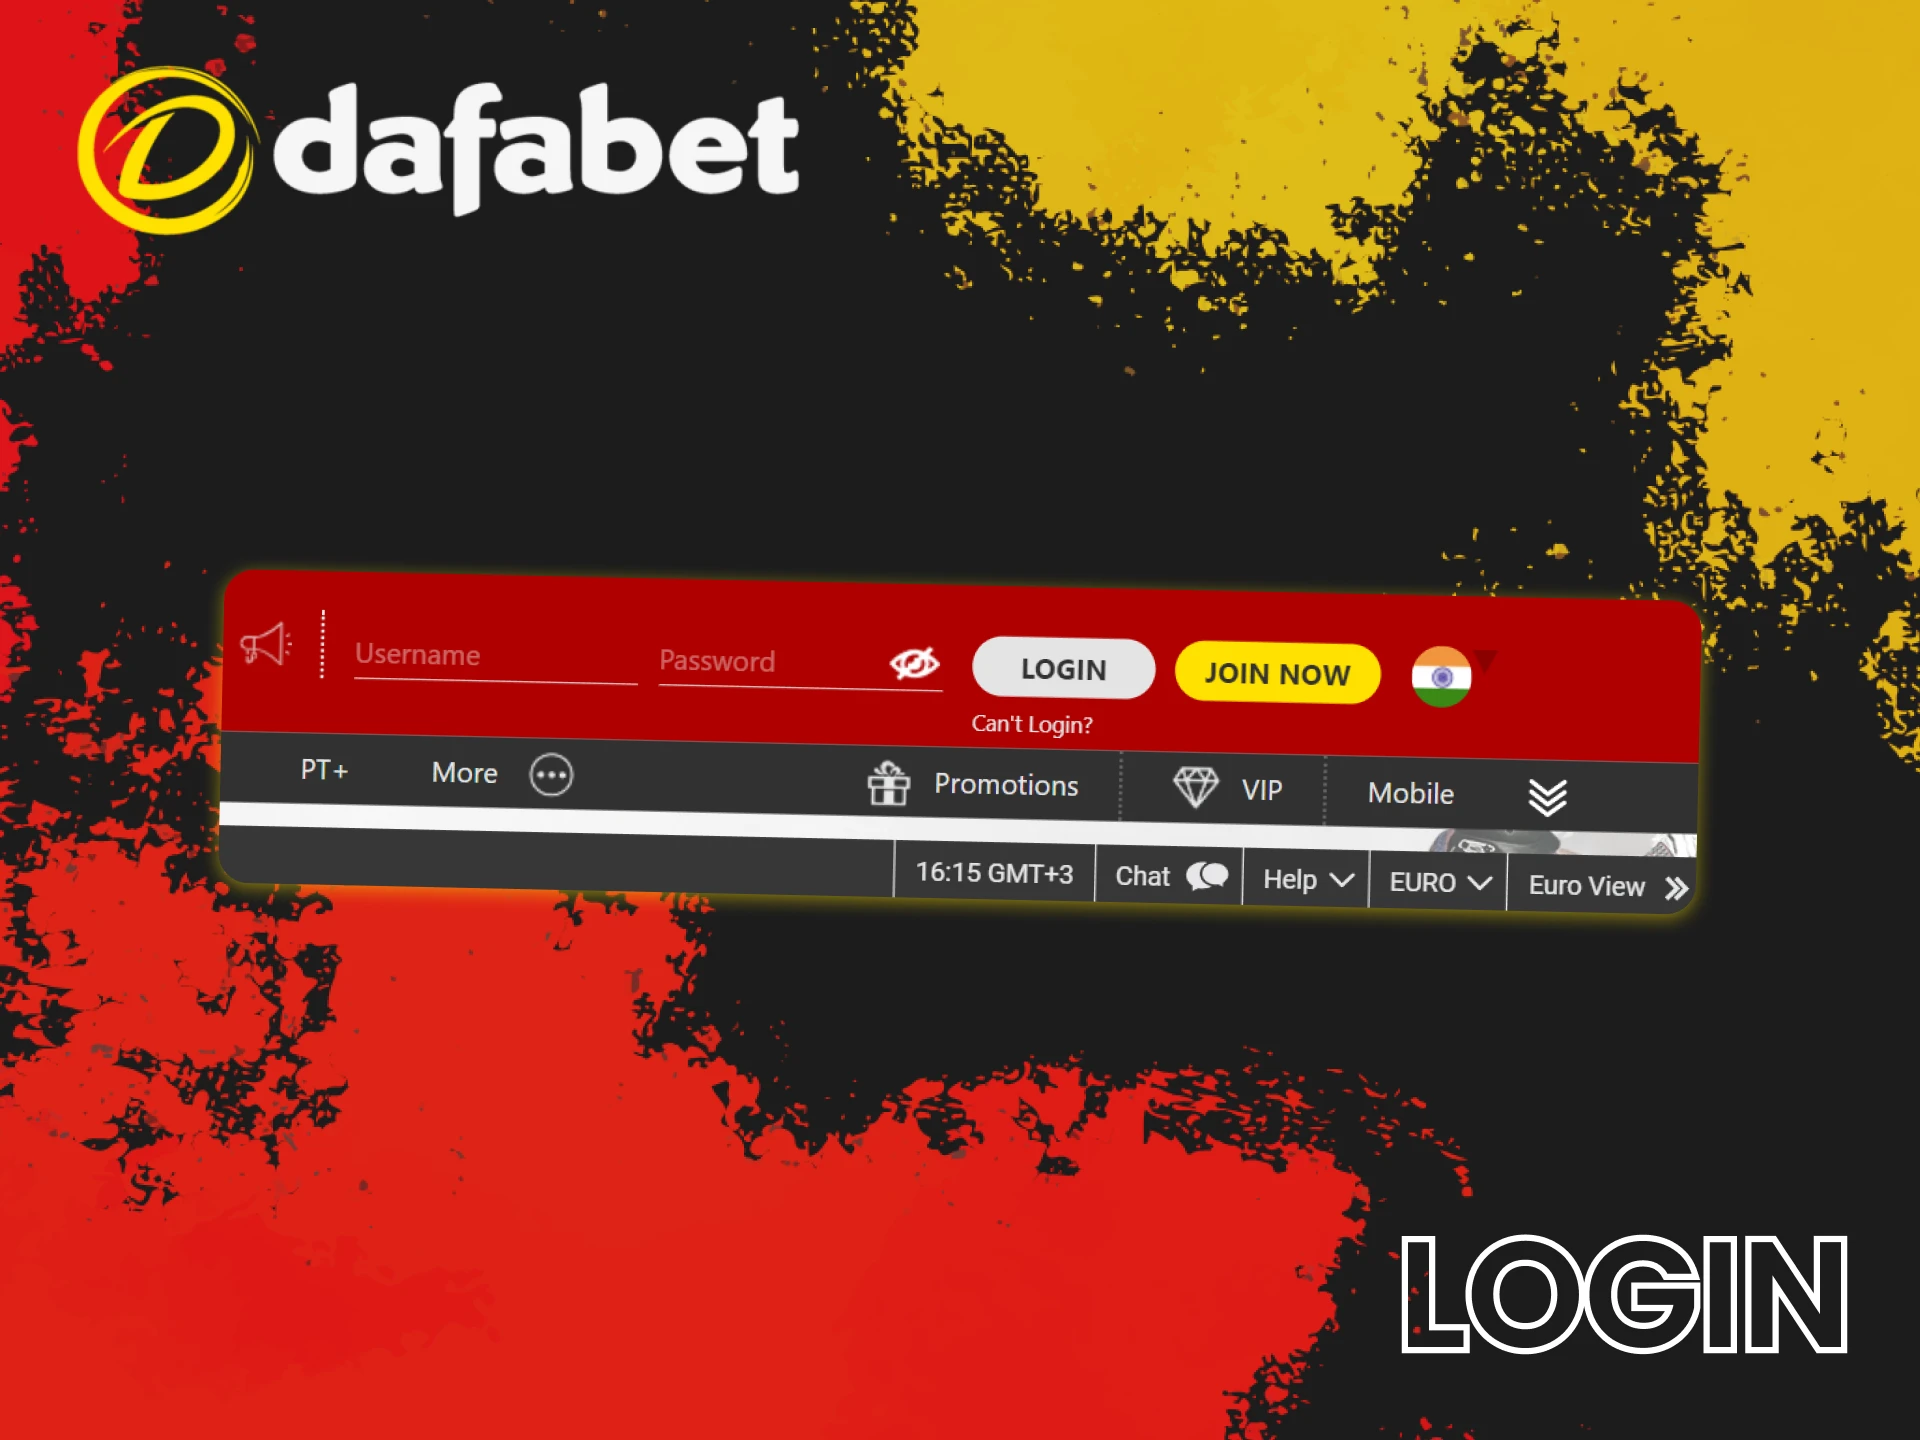 Login to your Dafabet account and place your football bet.